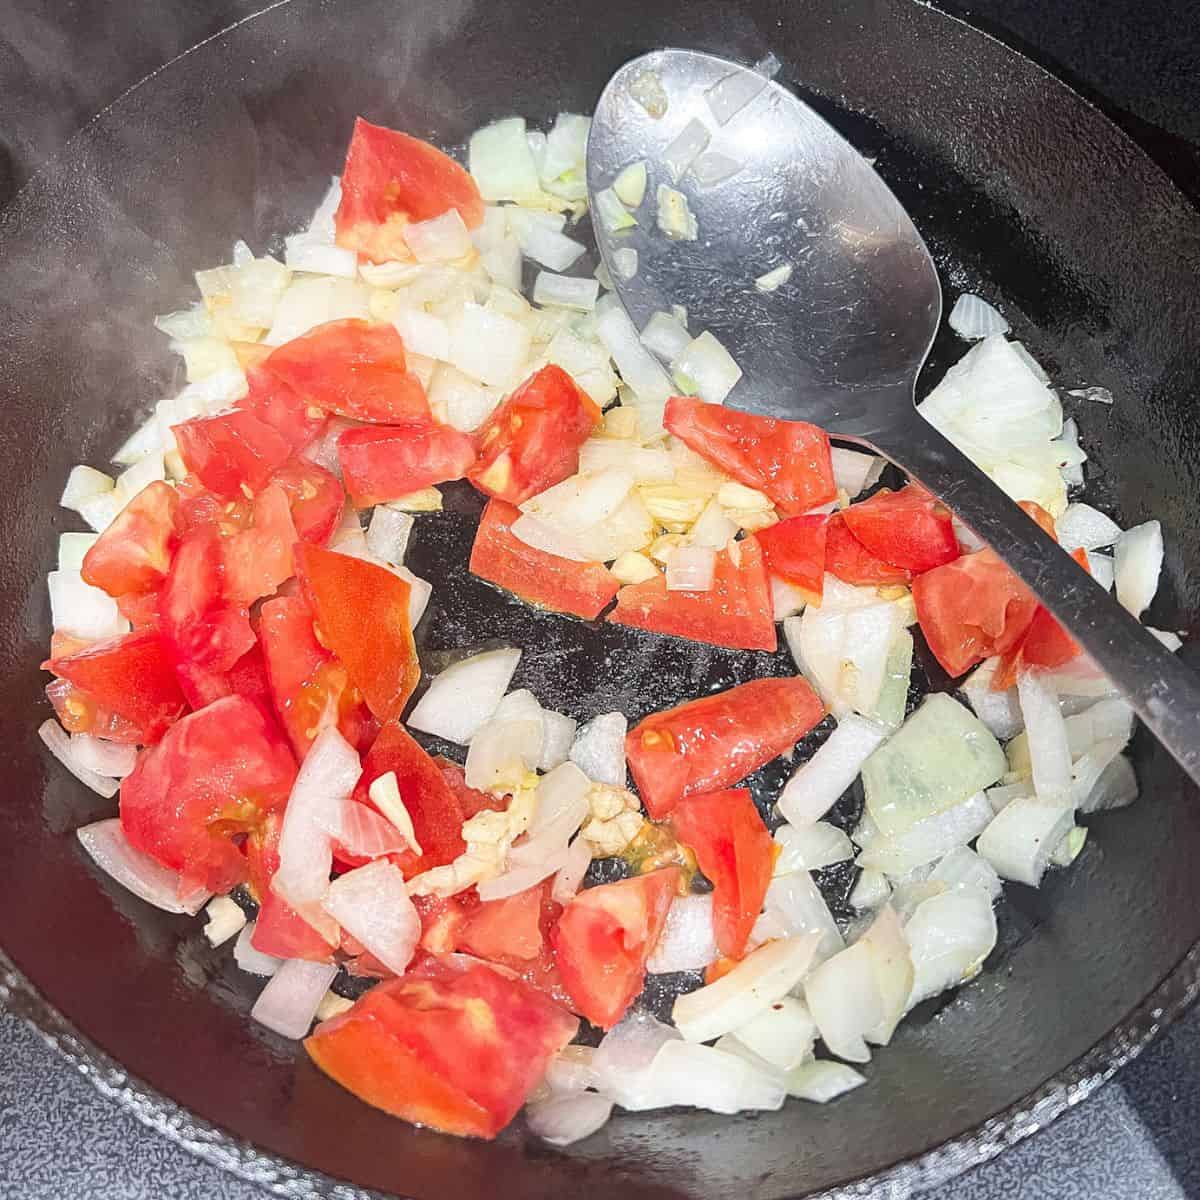 Cooking onion, garlic, and tomatoes in a skillet.